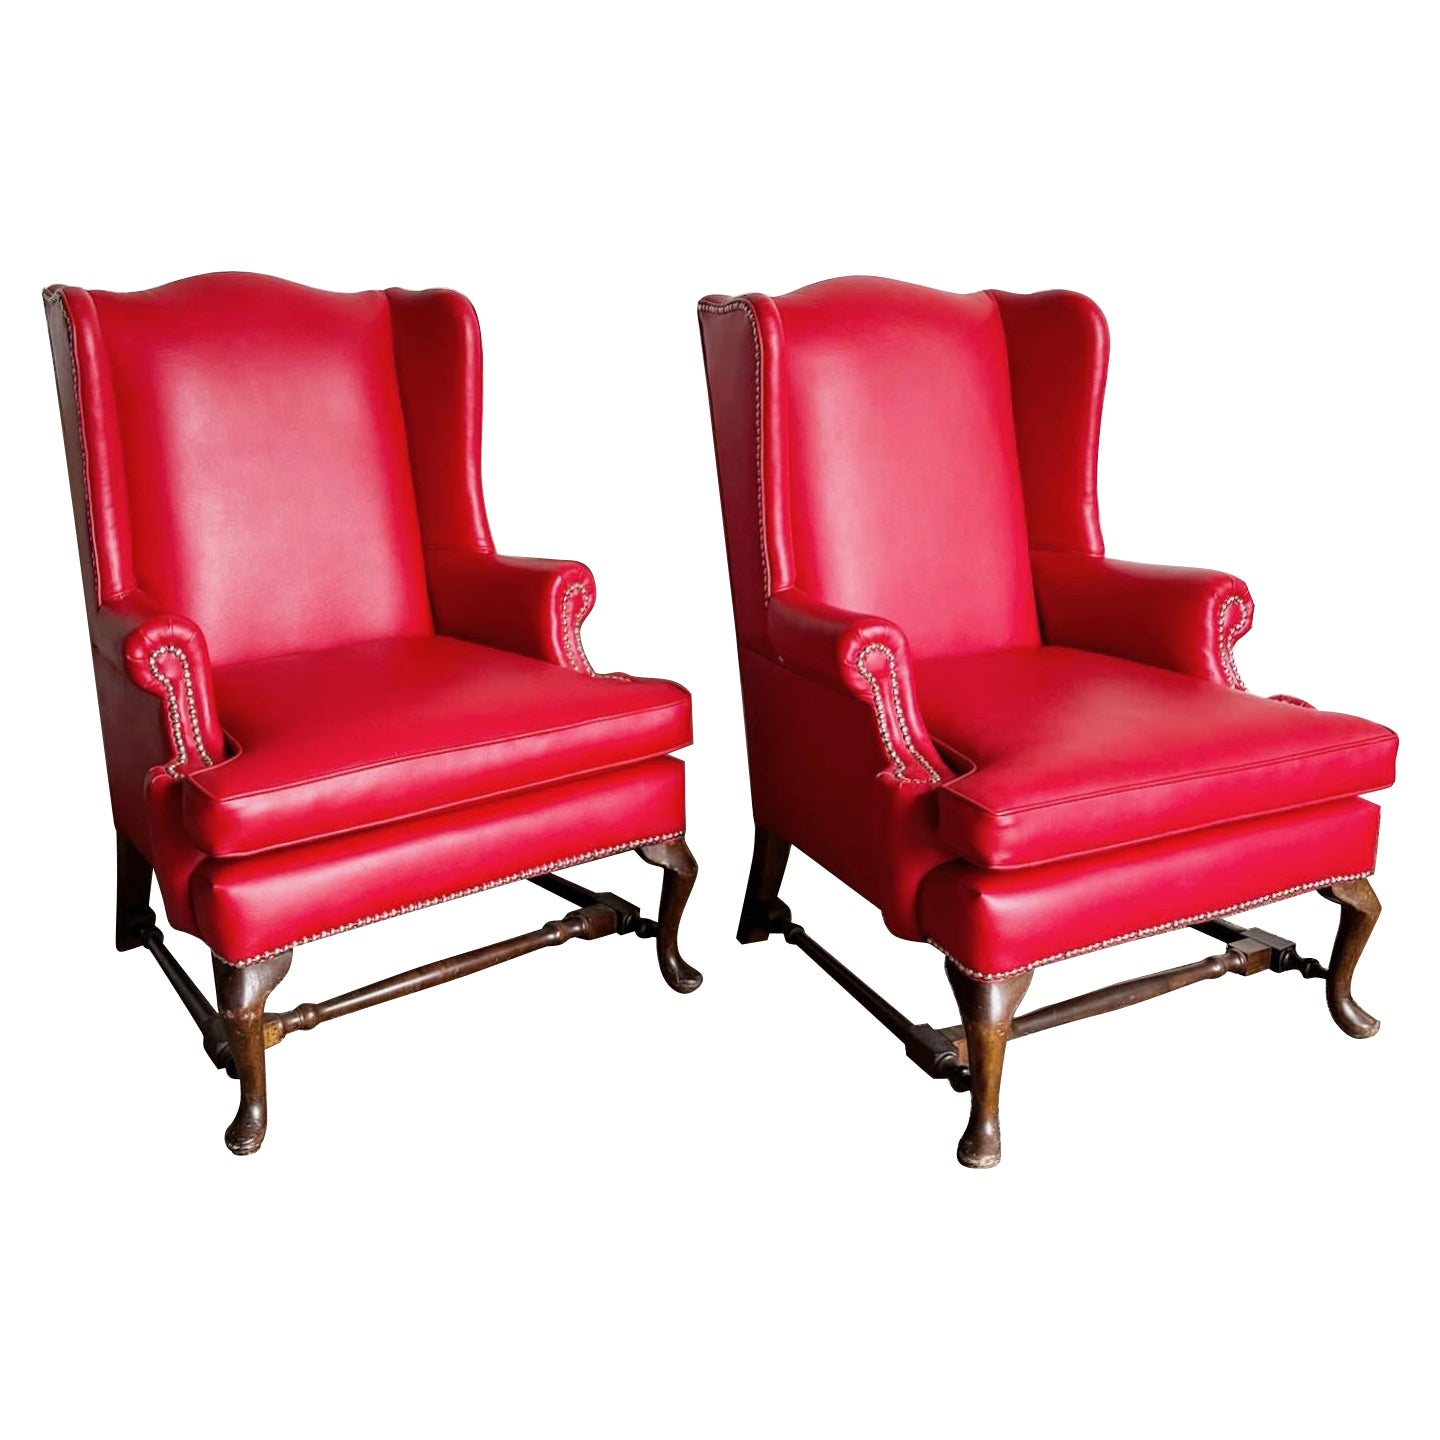 Traditional Red Faux Leather Wingback Chairs - a Pair